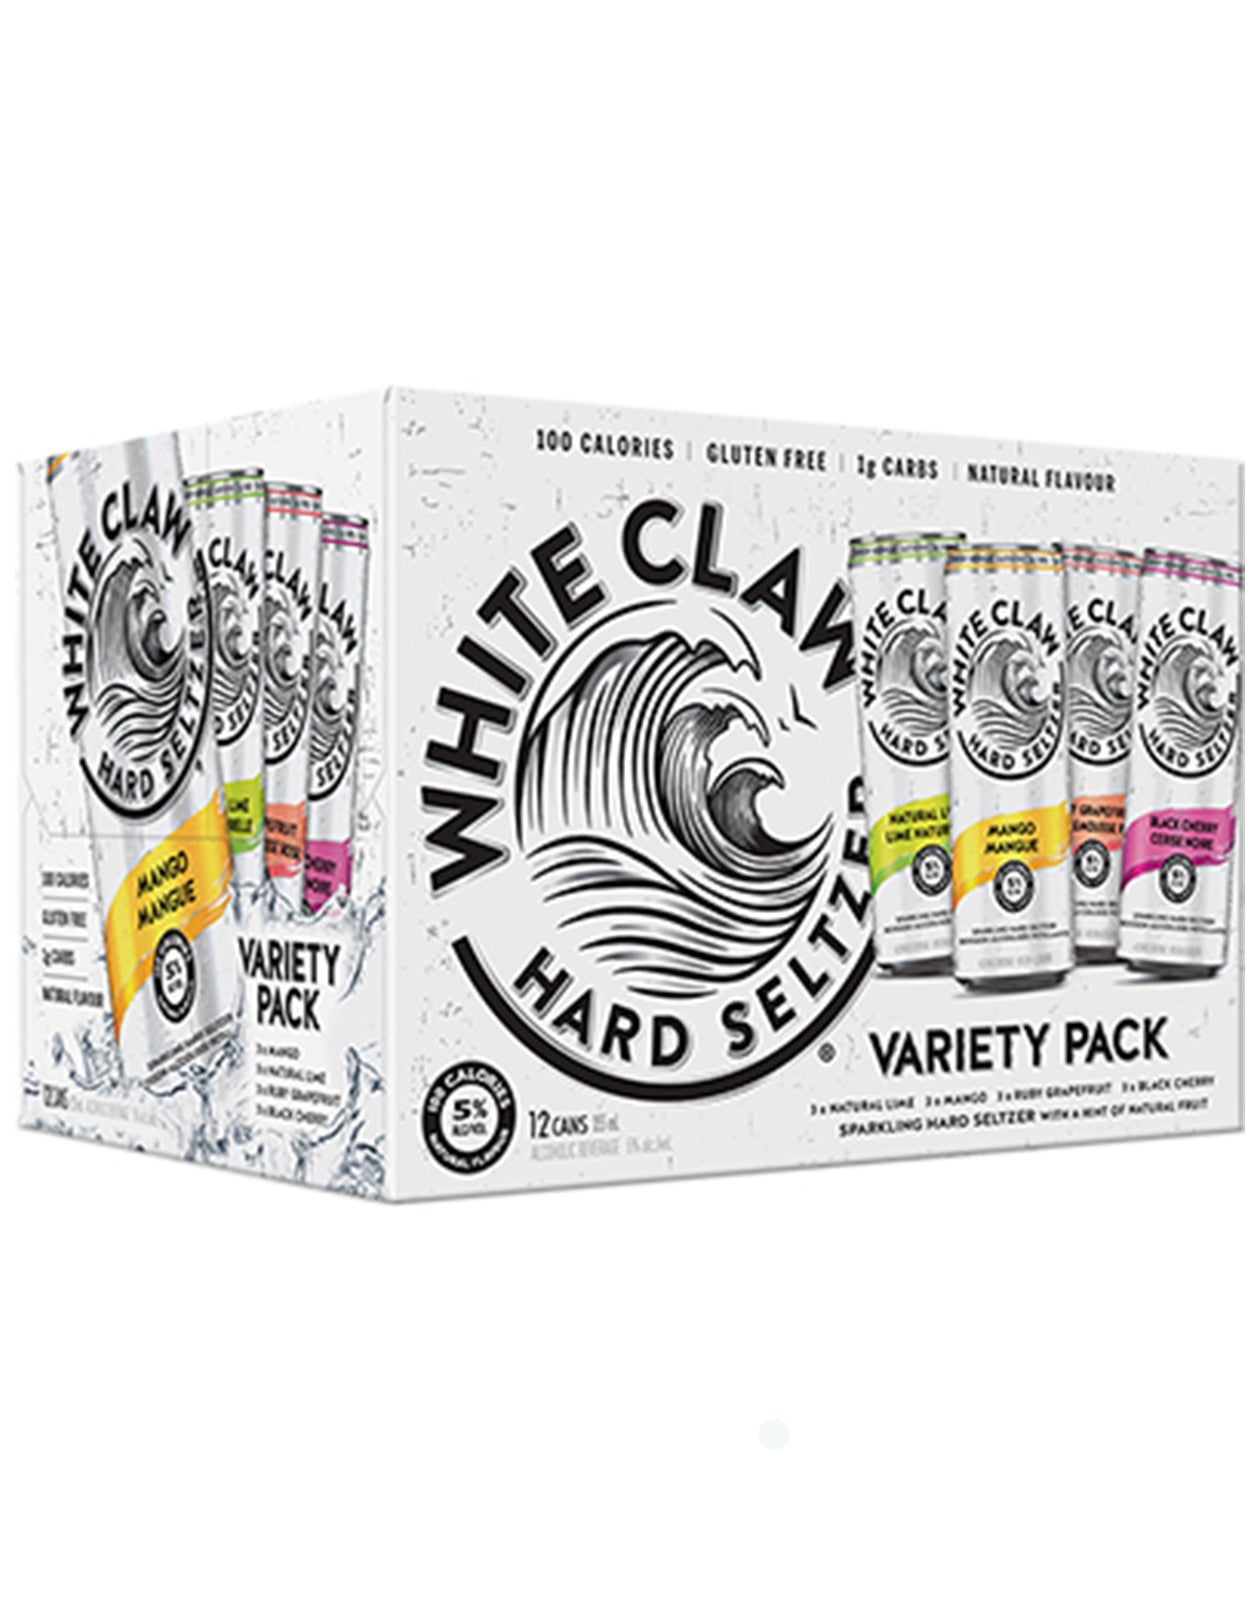 White Claw Variety Pack 355 ml - 12 Cans